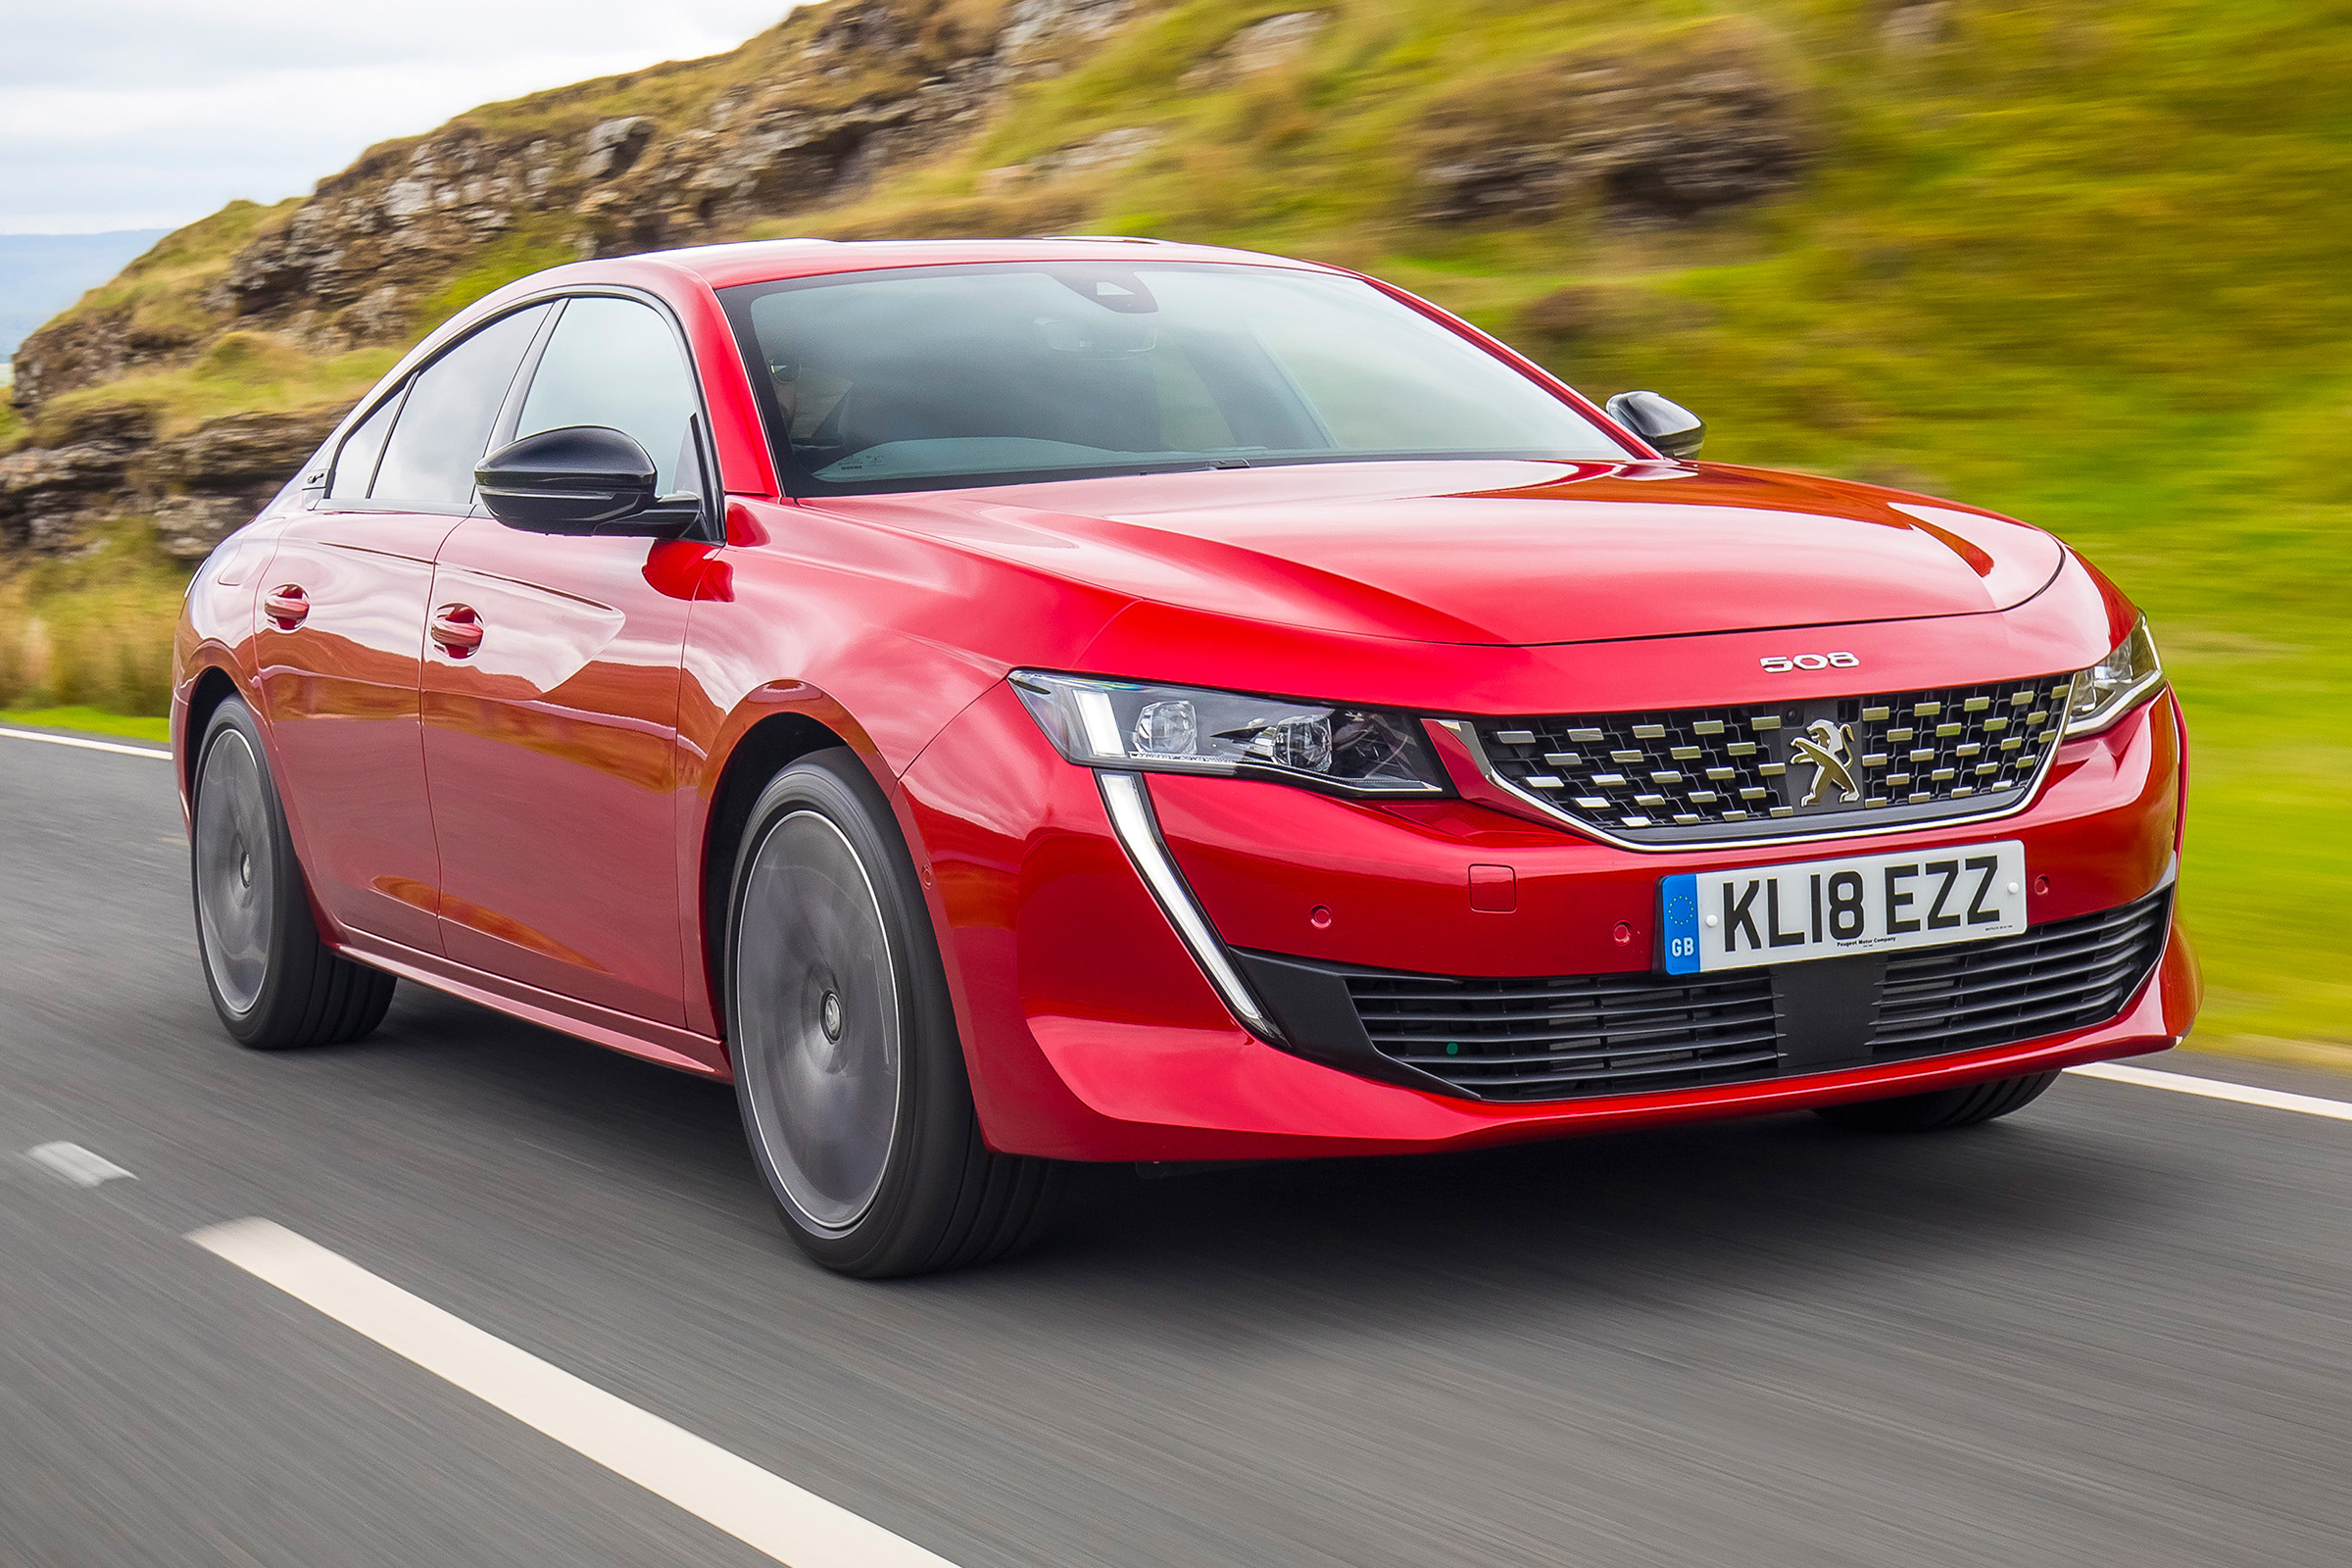 New Peugeot 508 Gt 1 6 Turbo Uk Review Auto Express